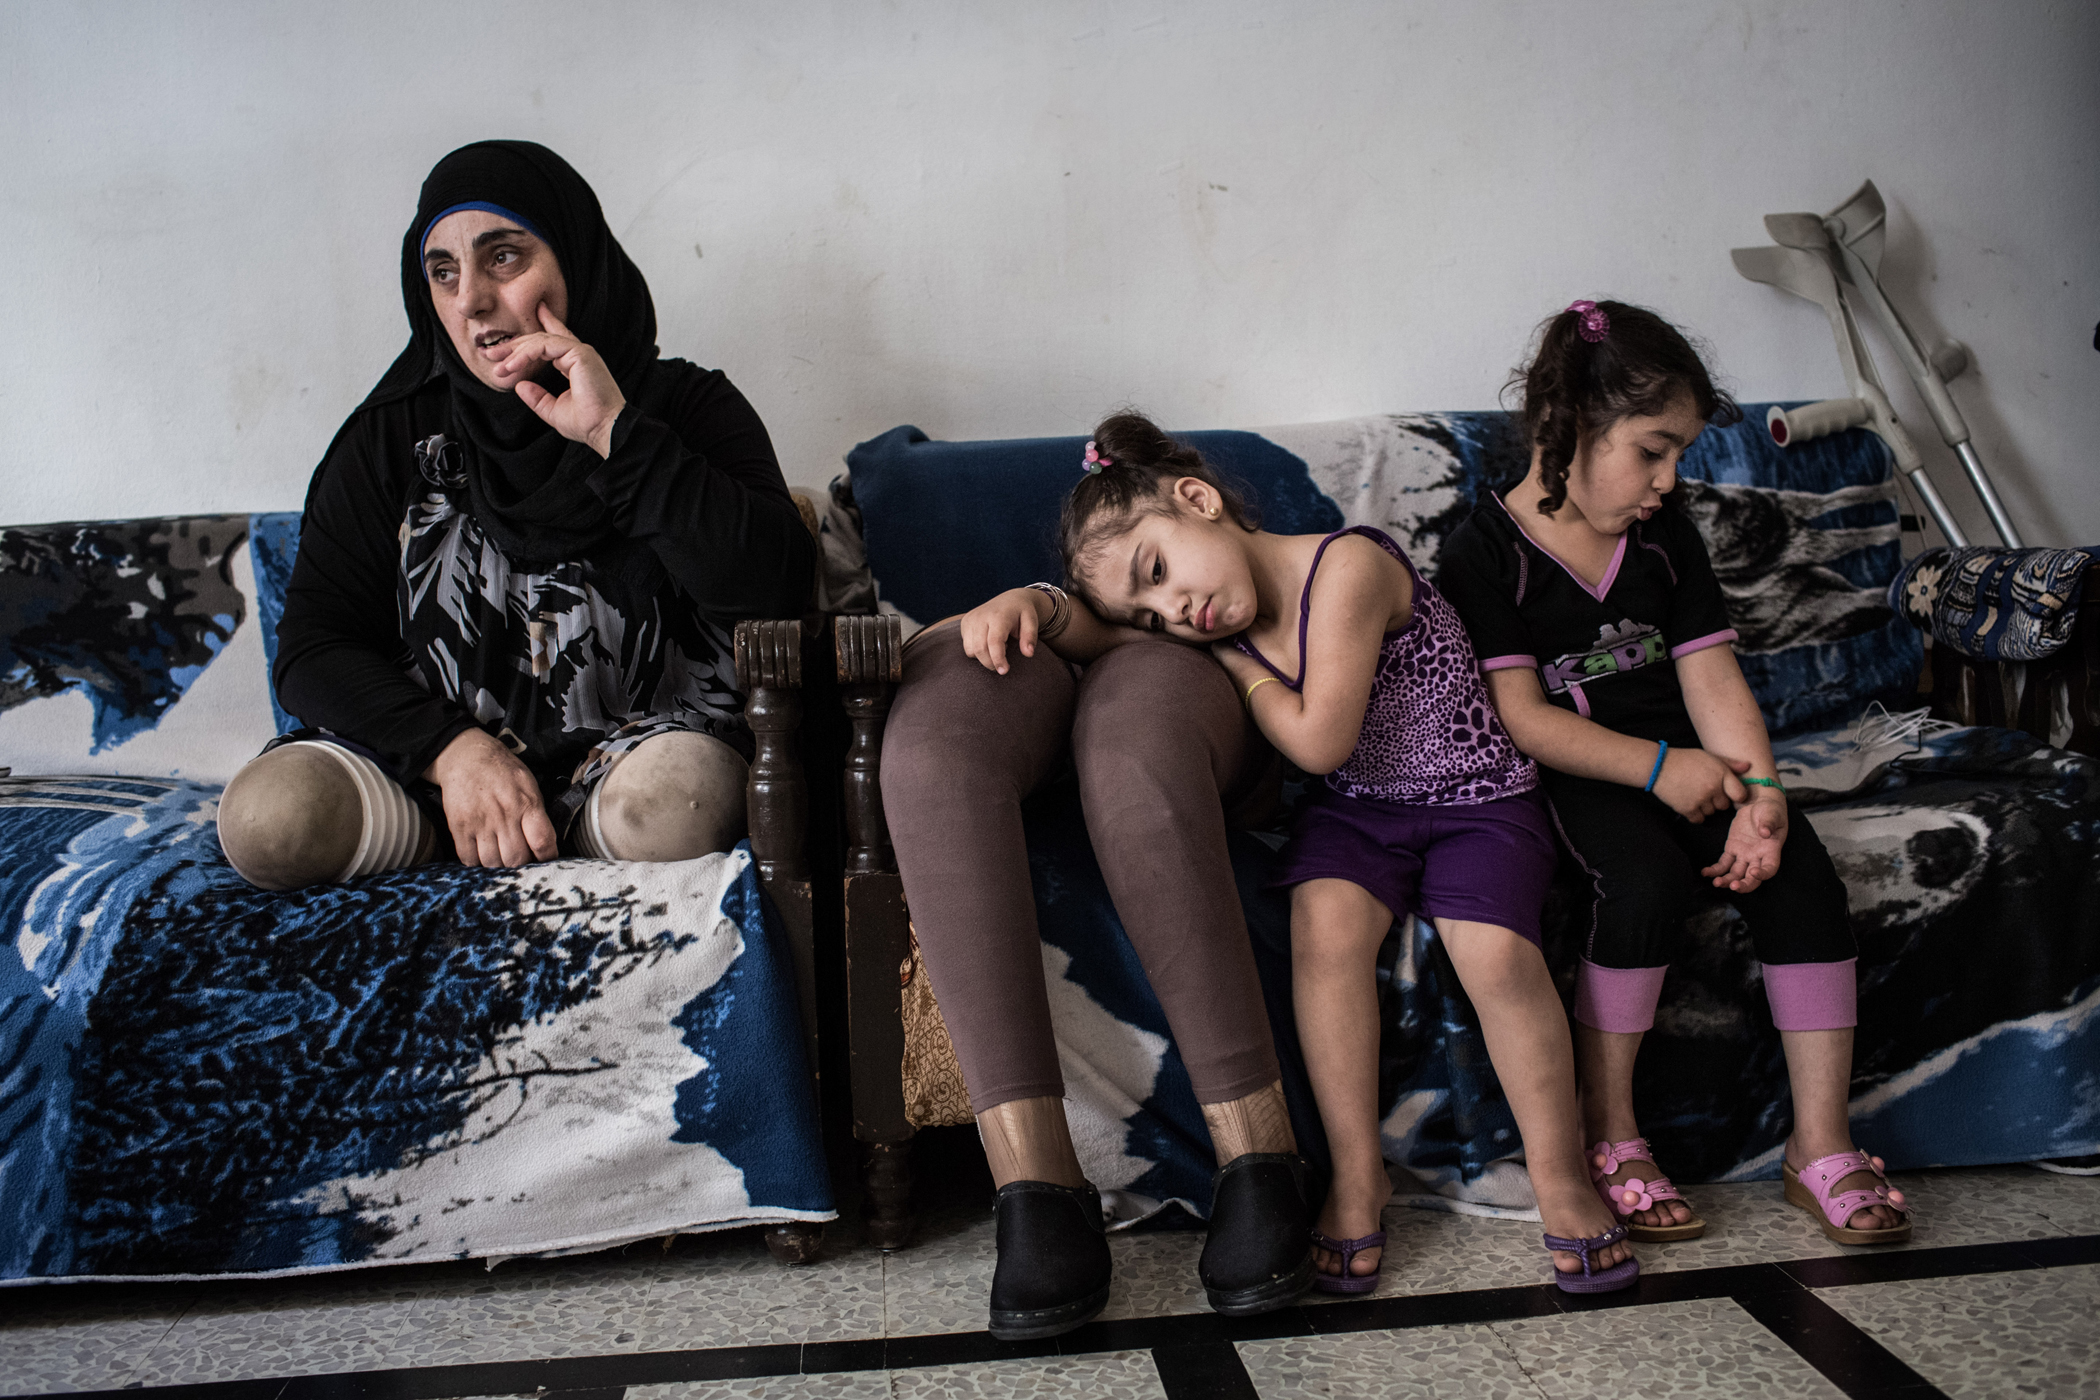 Hasna, pictured with her nieces, Aseel and Hadeel, 4, in their shared home in Tripoli, on June 11, 2014.  In March 2012, Hasna, her husband and her two children were traveling on a motorcycle in Qusayr when a bomb fell nearby: “My daughter was sleeping in my arms, she never woke up,” recalls Hasna of the day she lost her legs, husband and two children all at once. Her husband was still alive as they were being transported to a field hospital: “My husband was holding my hand the entire time, up until we were driven to the town of Lousseh. It was there they informed me that my husband had breathed his last breath.” That same night Hasna reached a hospital in Lebanon at around 4:00 am and lost consciousness . She had seen her legs and suspected they were lost.  After four surgeries, both legs were lost and  Handicap International, an NGO working in the region, supplied her with prosthetics: “It was hard and difficult but now I always try to focus on the positive things. I don't want to be sad and angry, I don't want the negative feelings to take control of me.” UNHCR / A. McConnell / June 2014